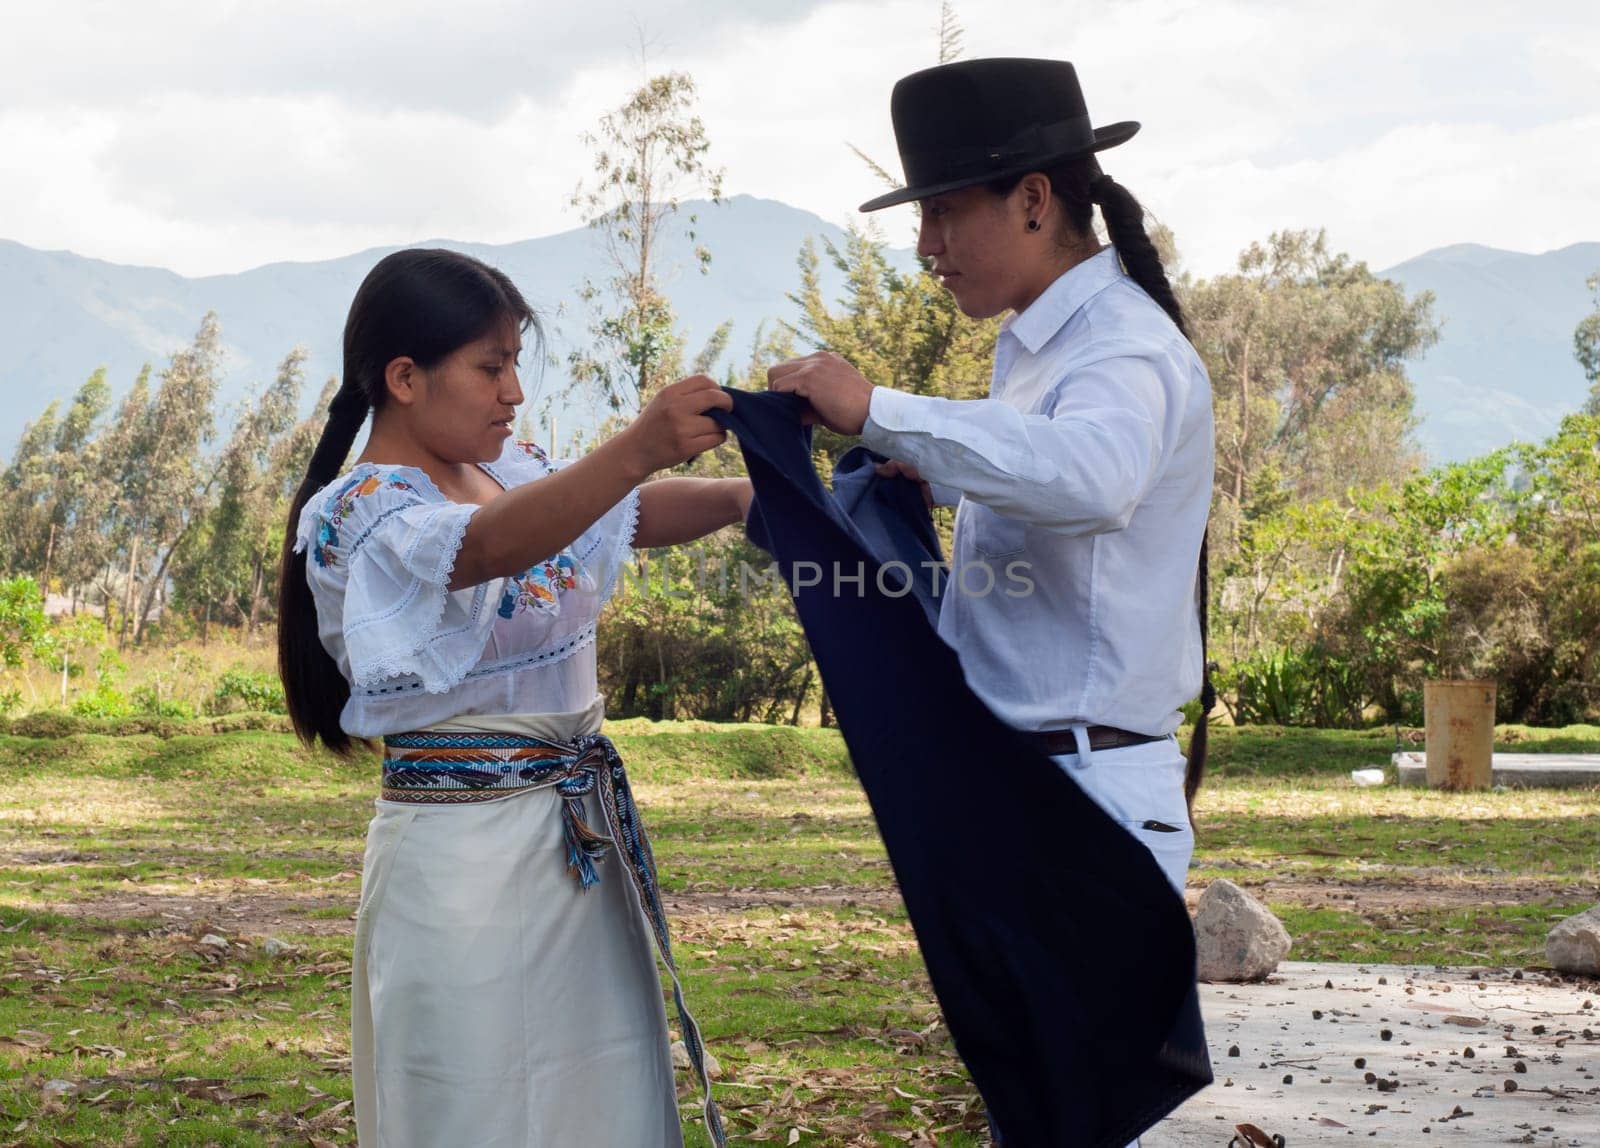 Indigenous man lovingly helps his wife get ready in her traditional dress for a cultural celebration by Raulmartin